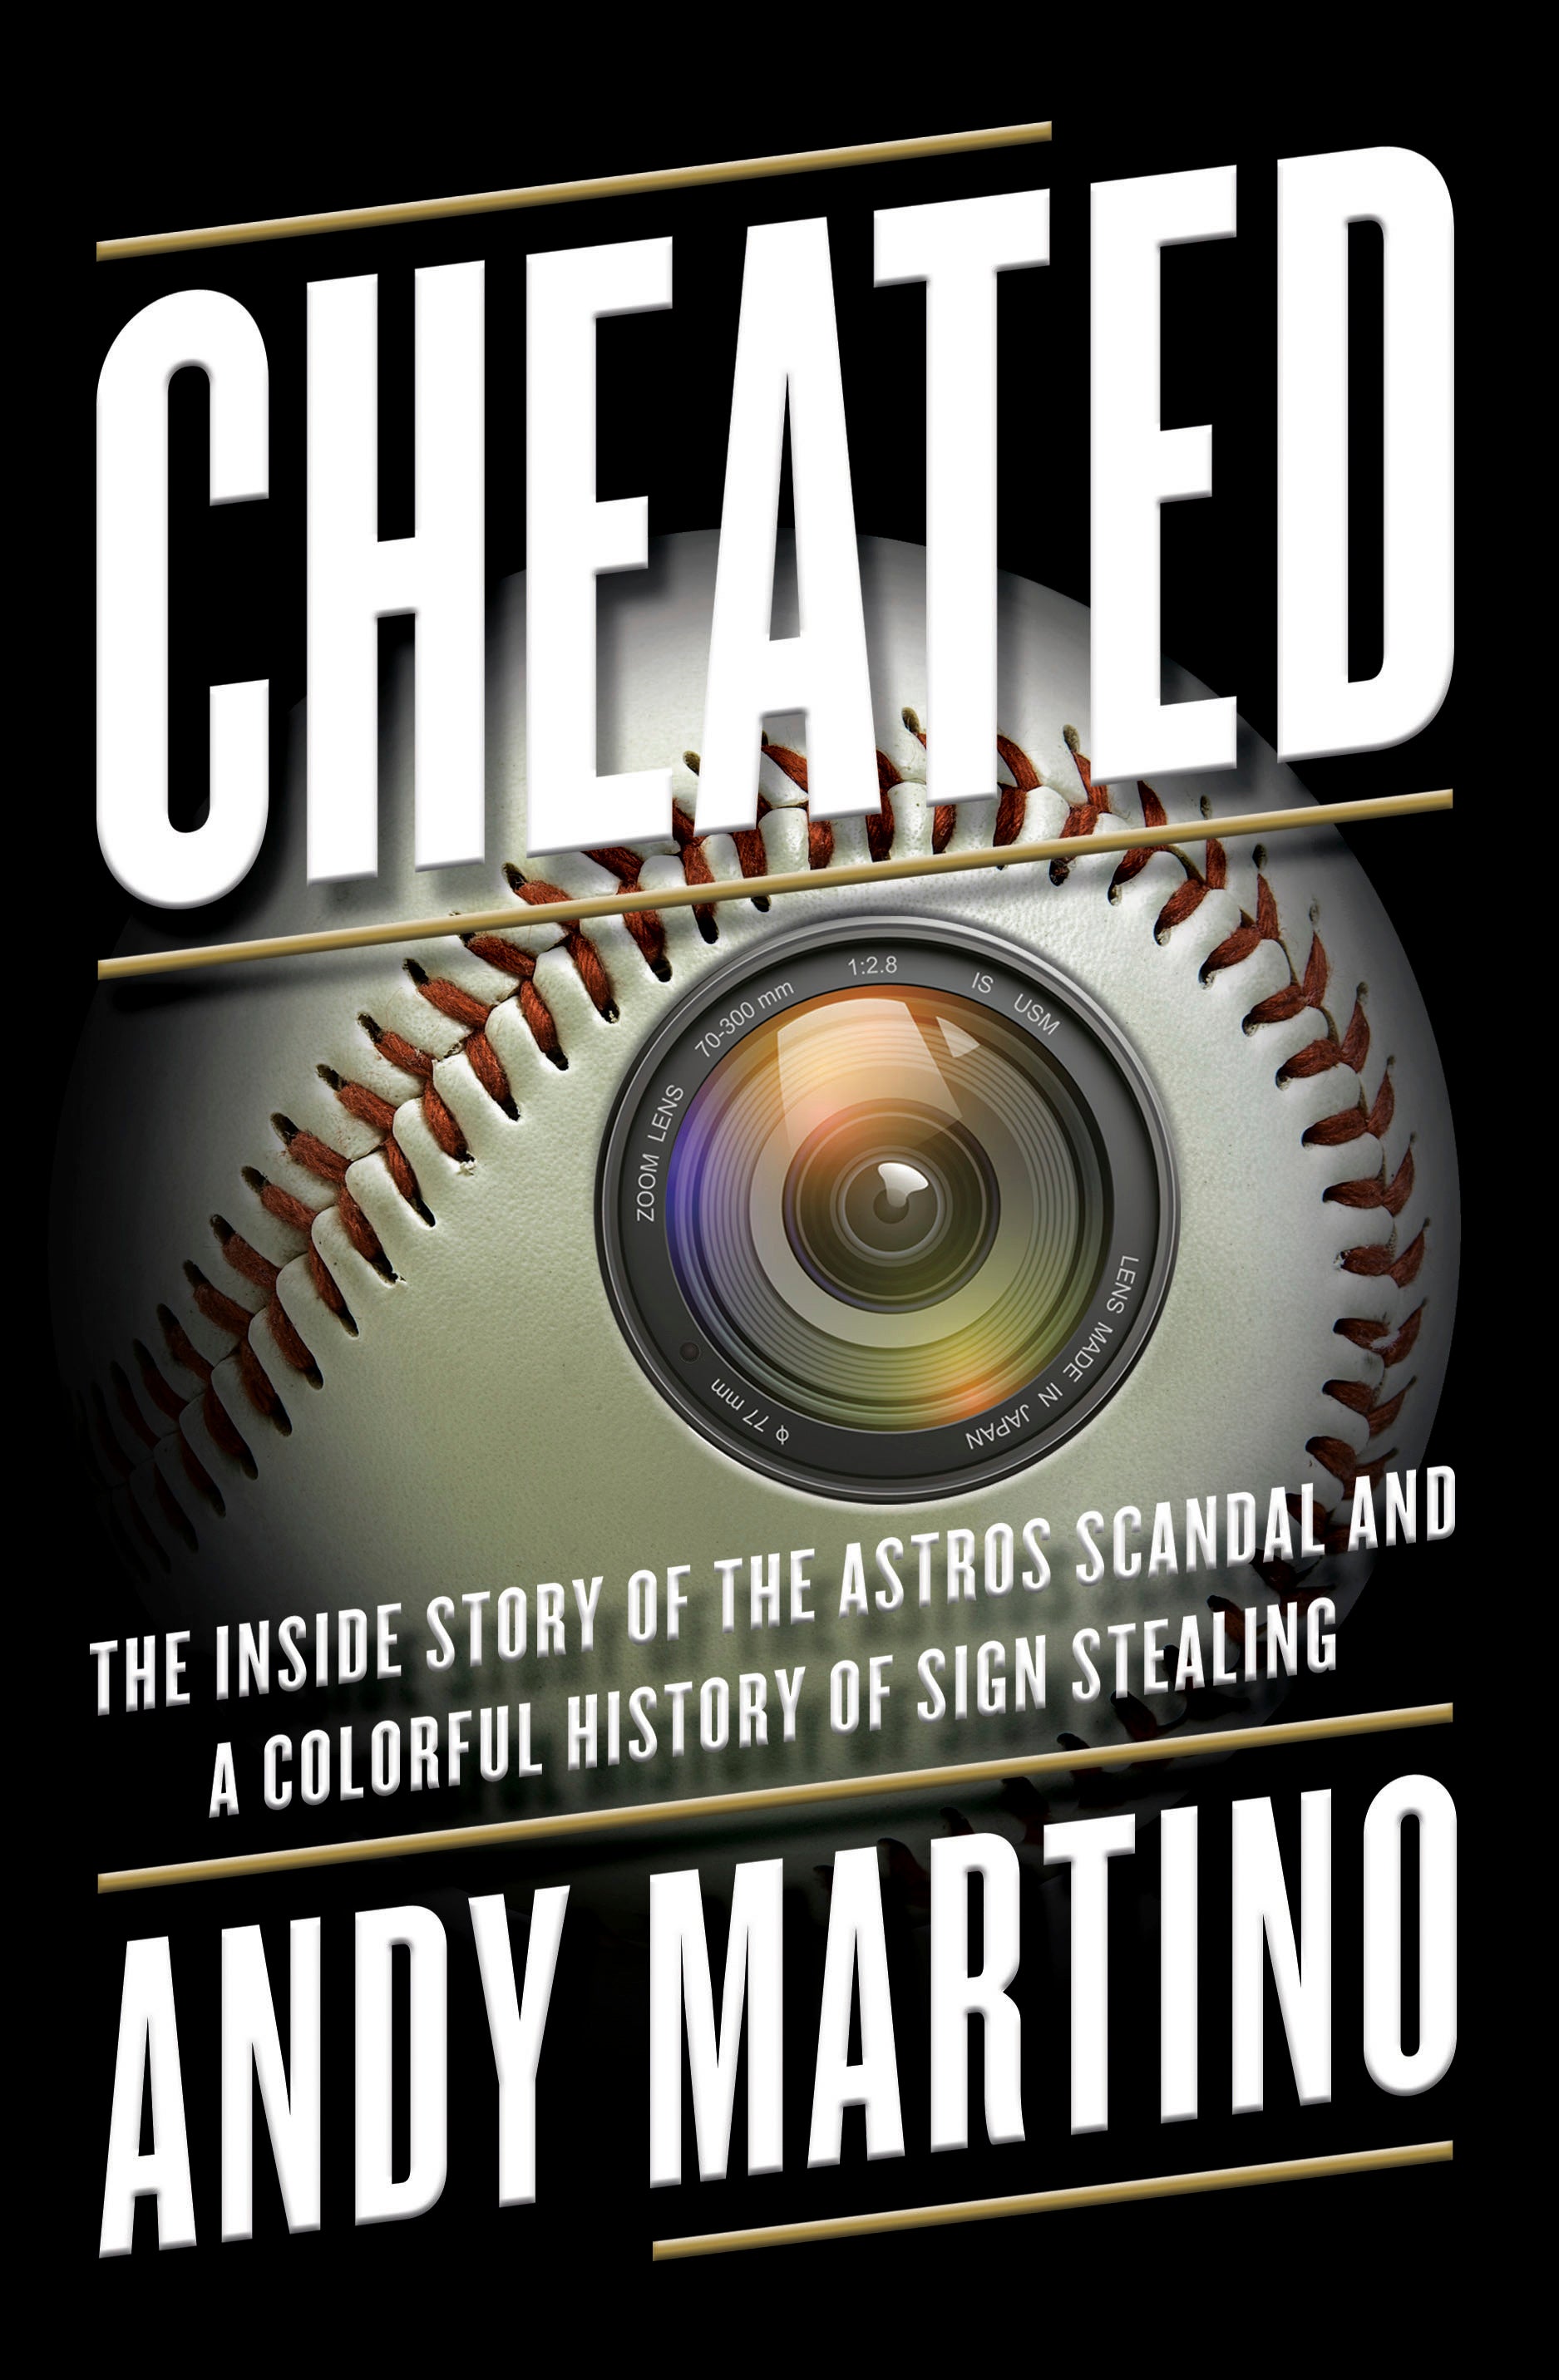 Review: 'Cheated' details an shameful chapter in baseball Major